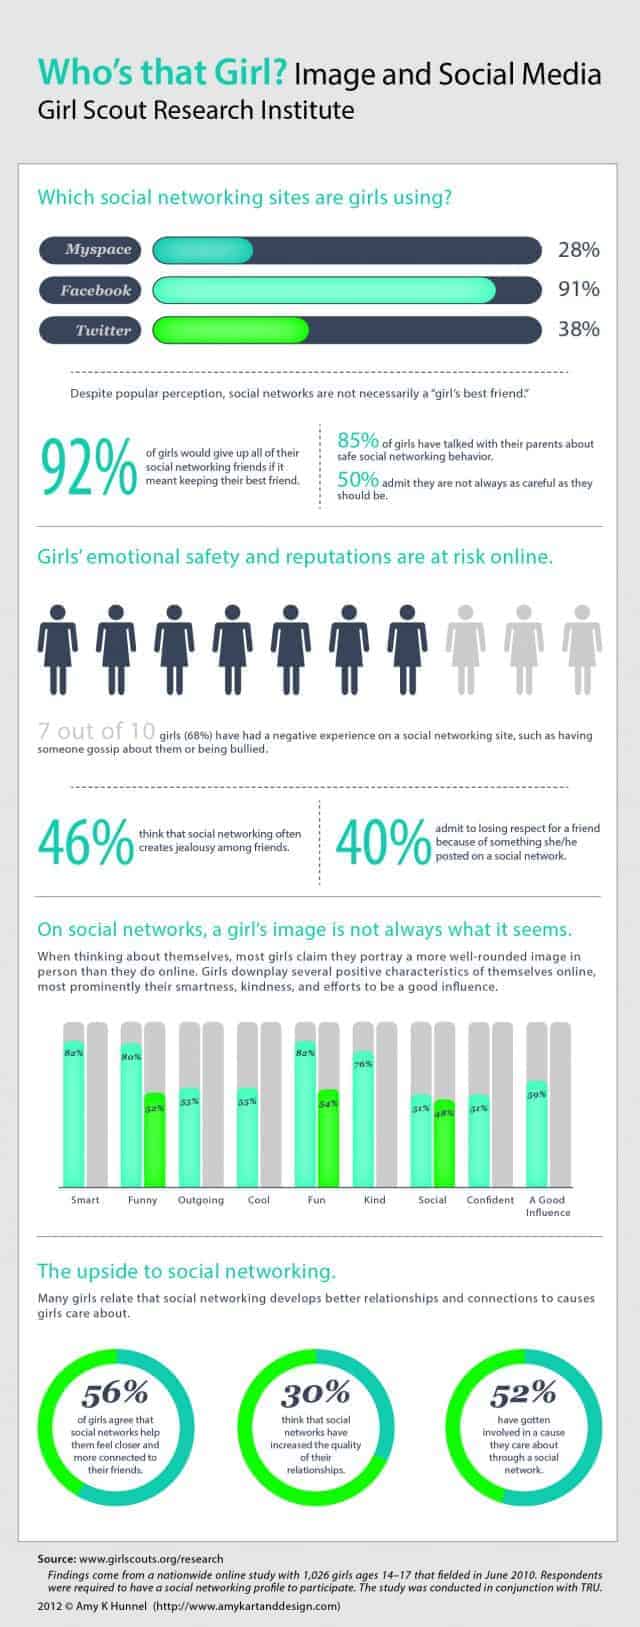 Who’s that Girl Image and Social Media Infographic